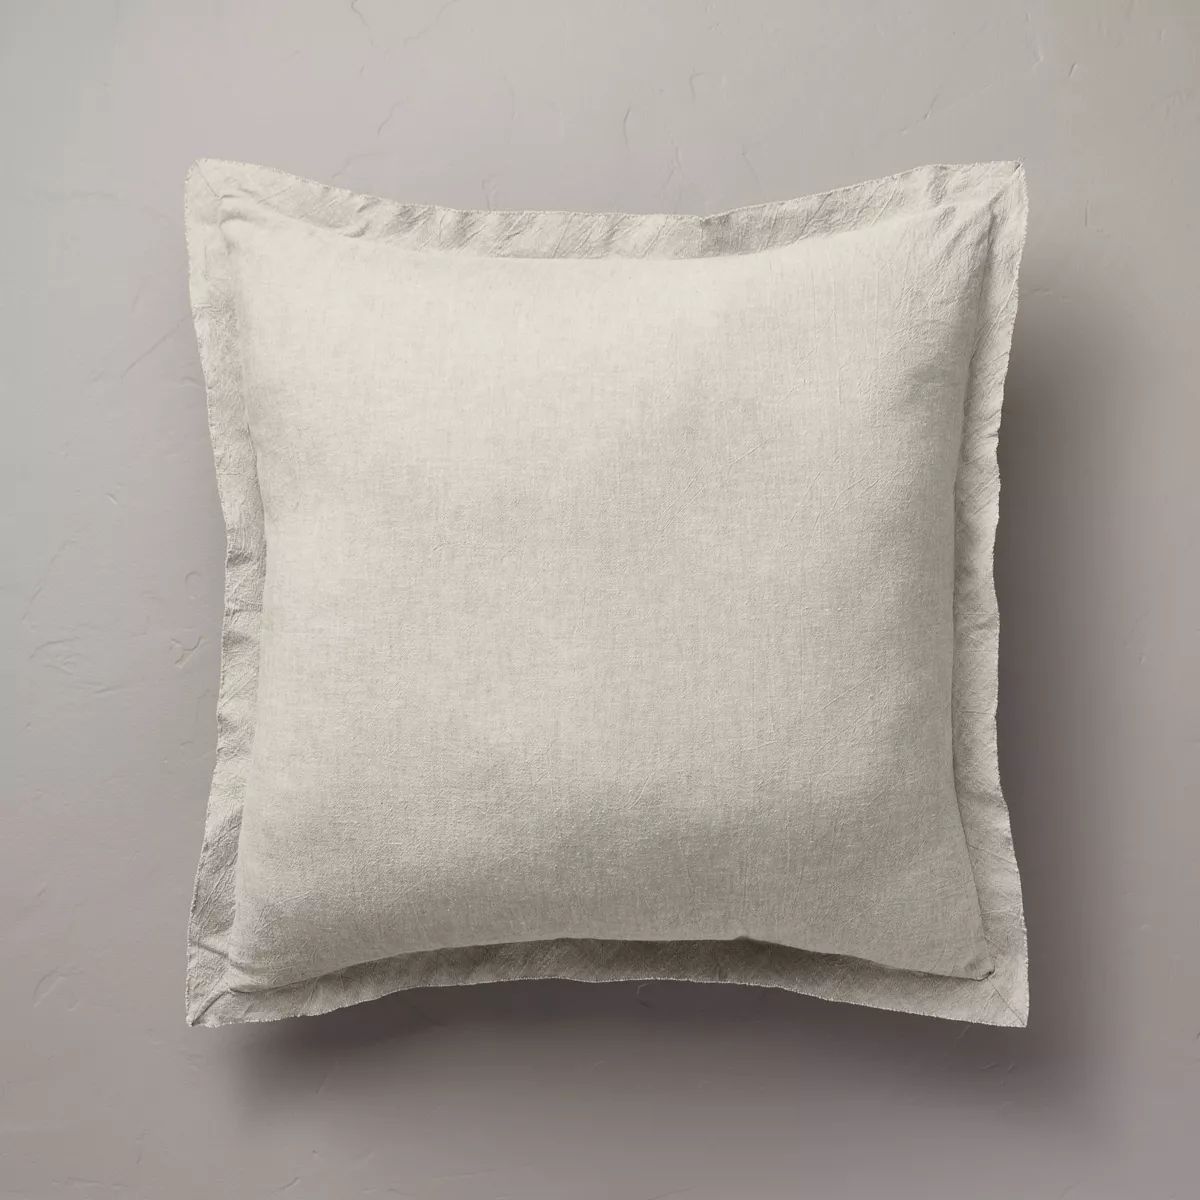 26"x26" Linen Blend Euro Bed Pillow - Hearth & Hand­™ with Magnolia | Target